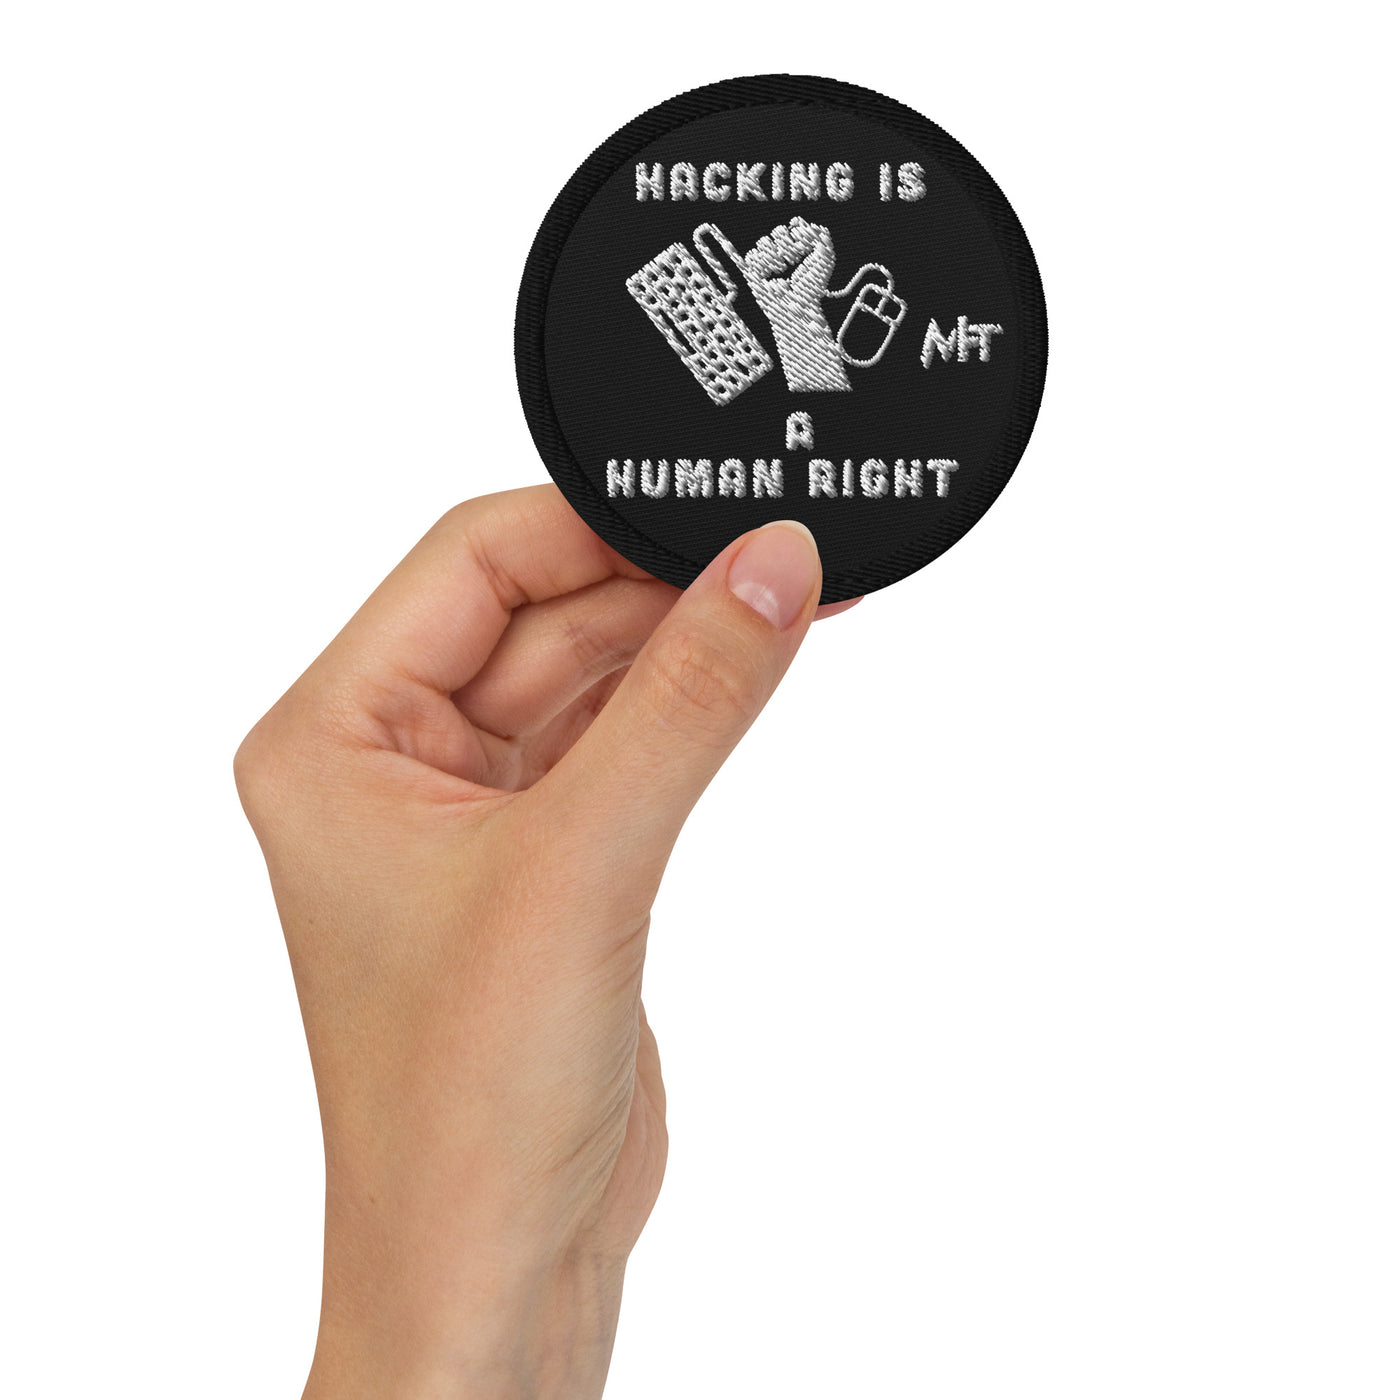 Hacking is a Human Right - Embroidered patches